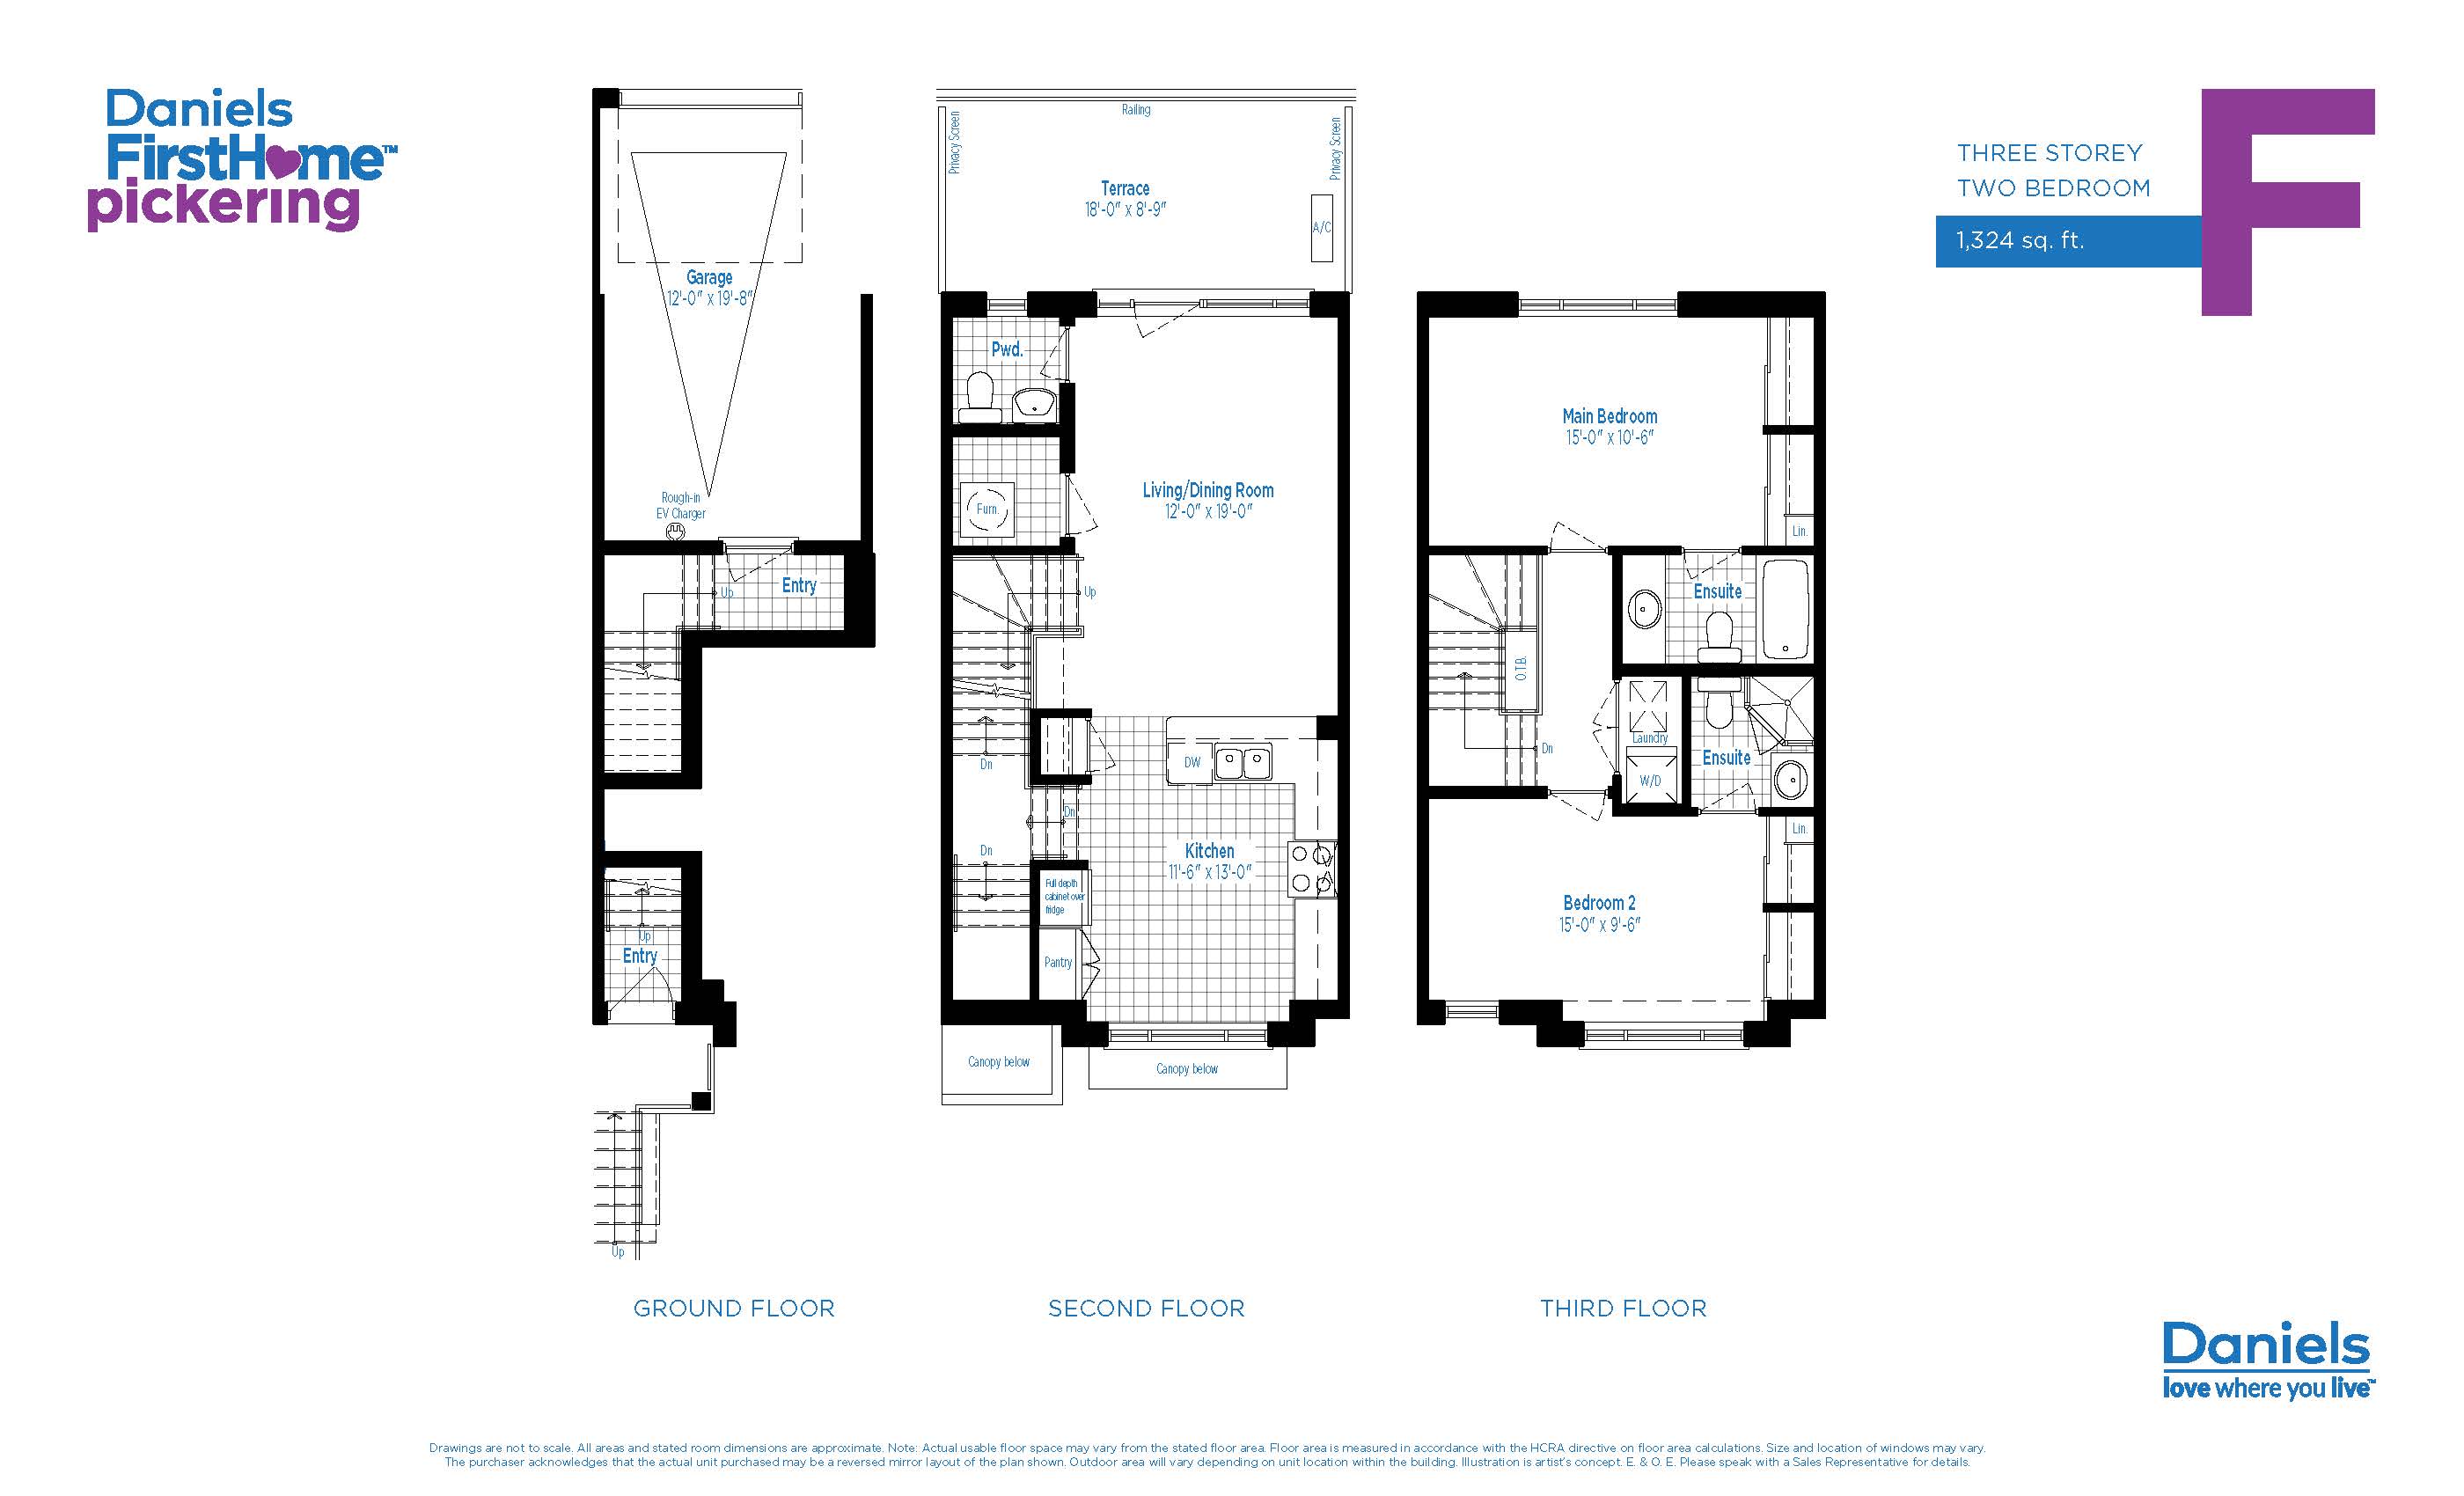  Floor Plan of Daniels FirstHome with undefined beds